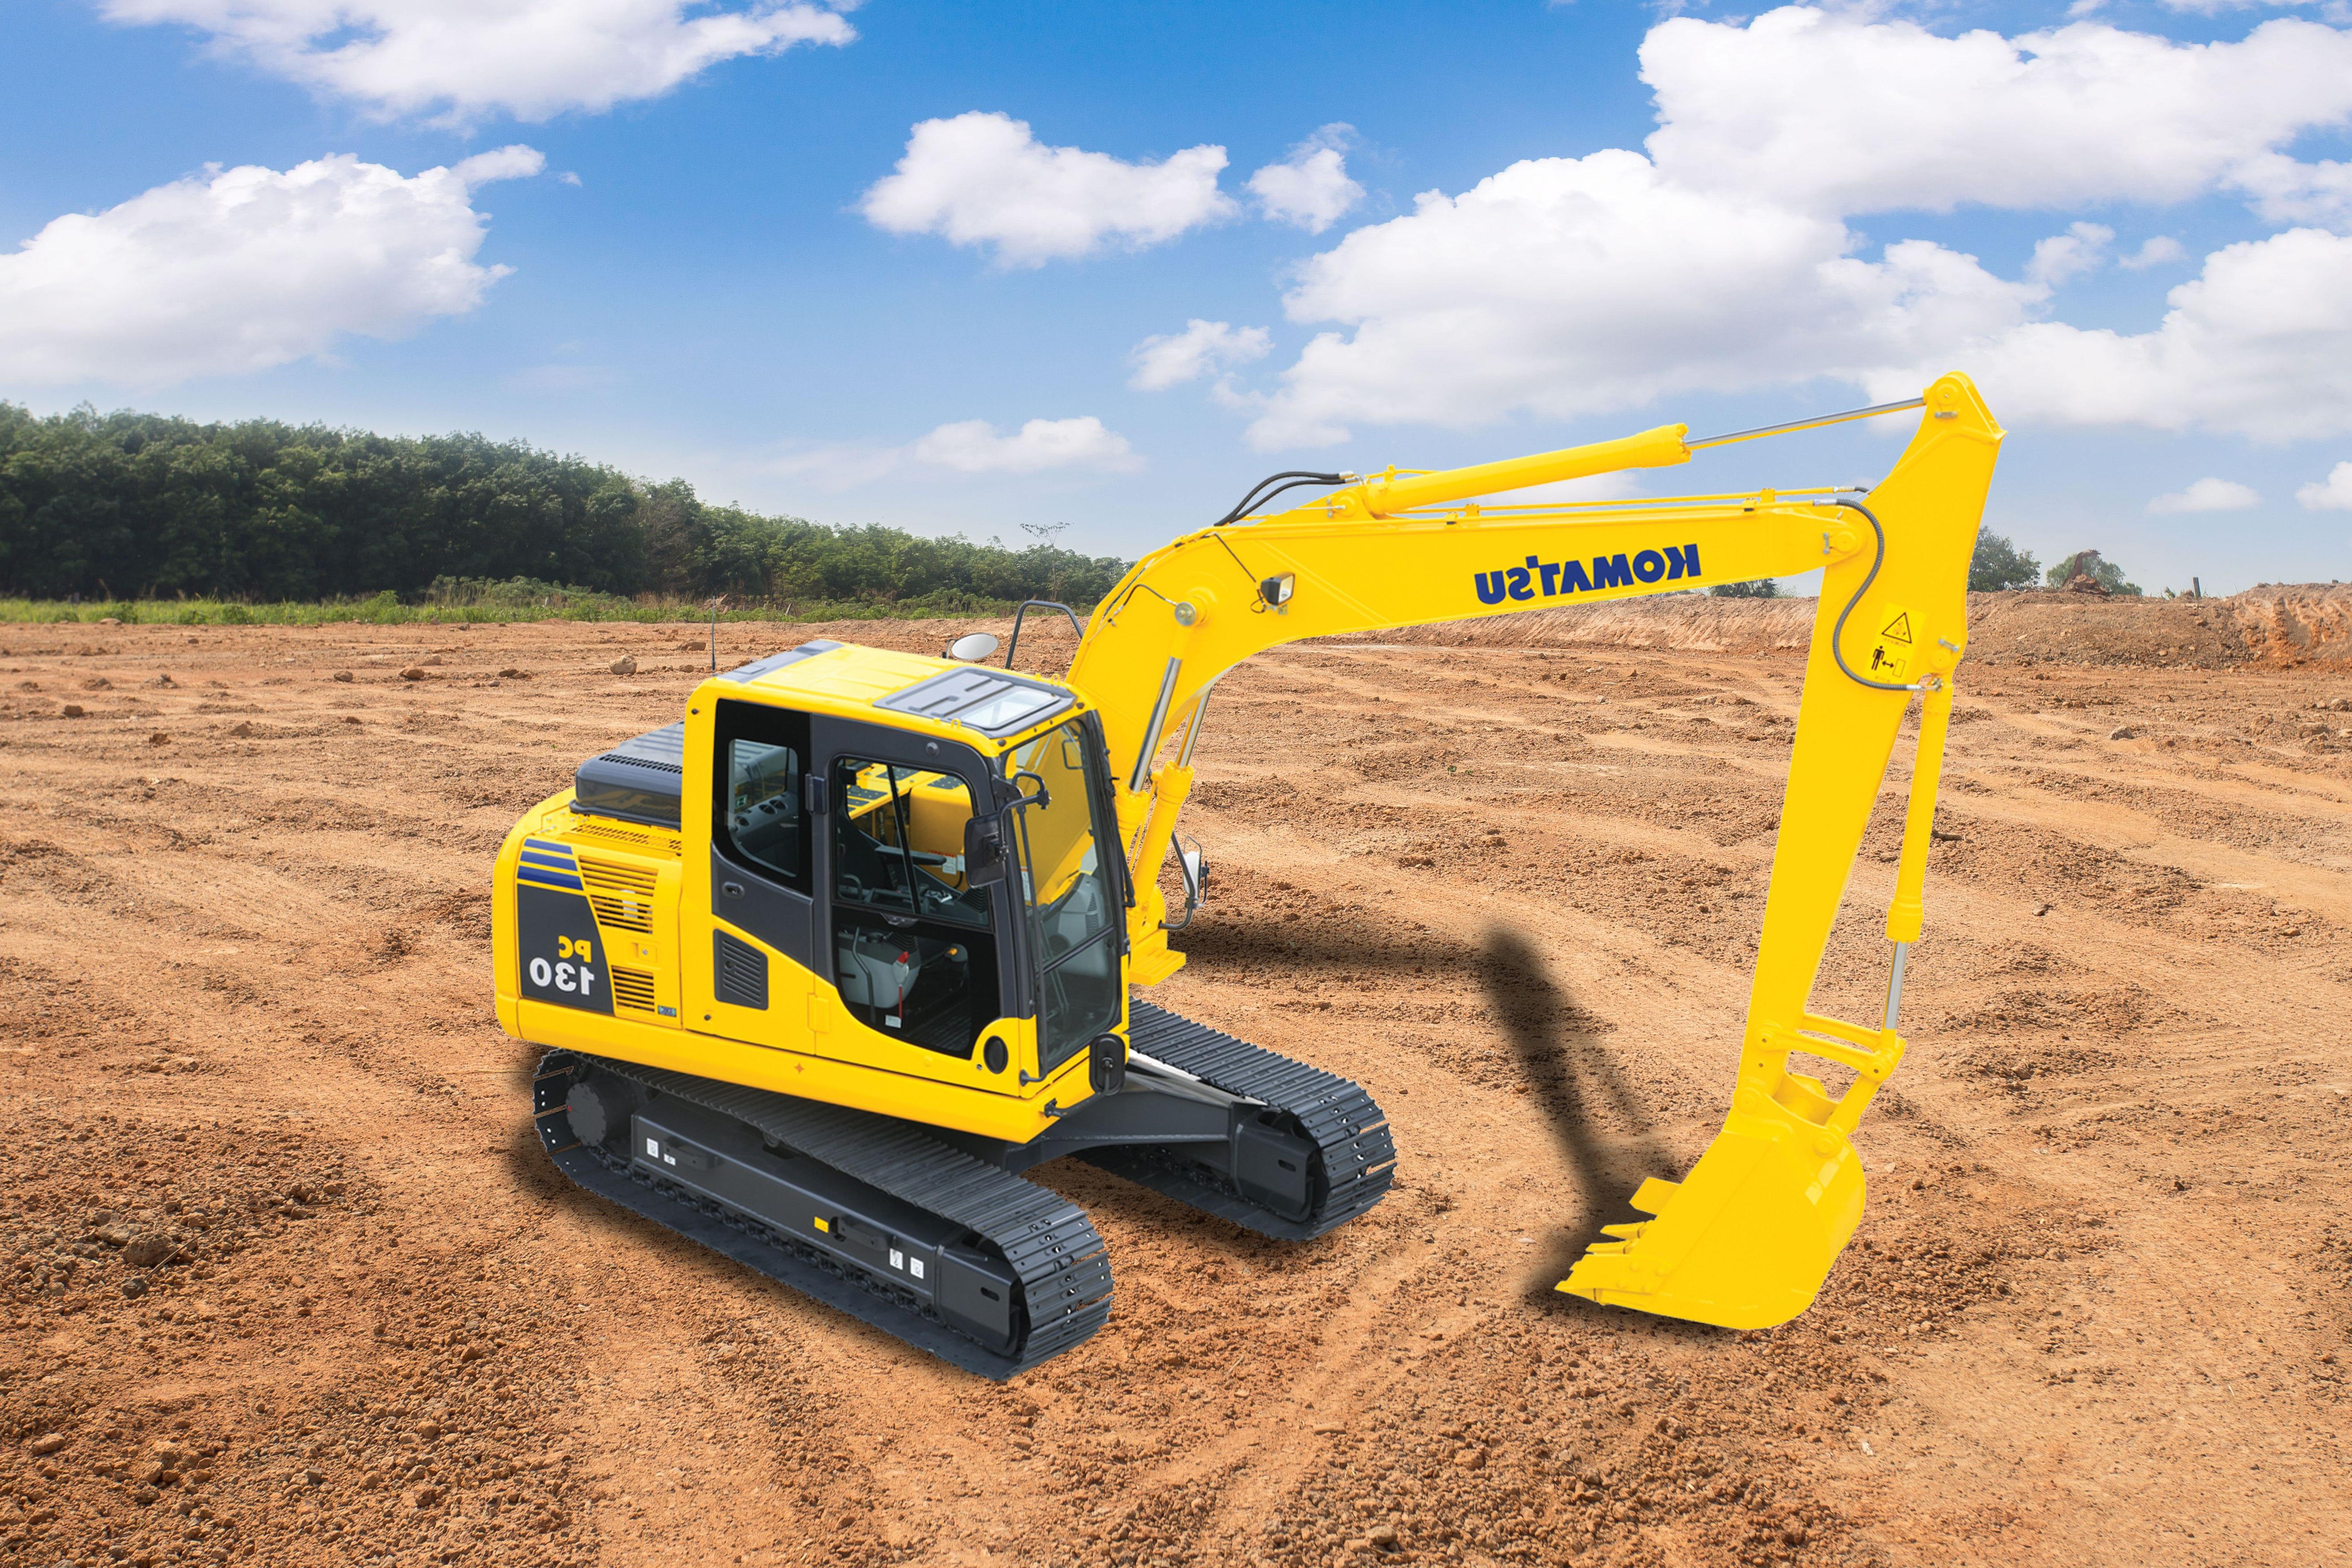 Komatsu’s new PC130-11 excavator offers fast cycle times in a machine designed for easy transport